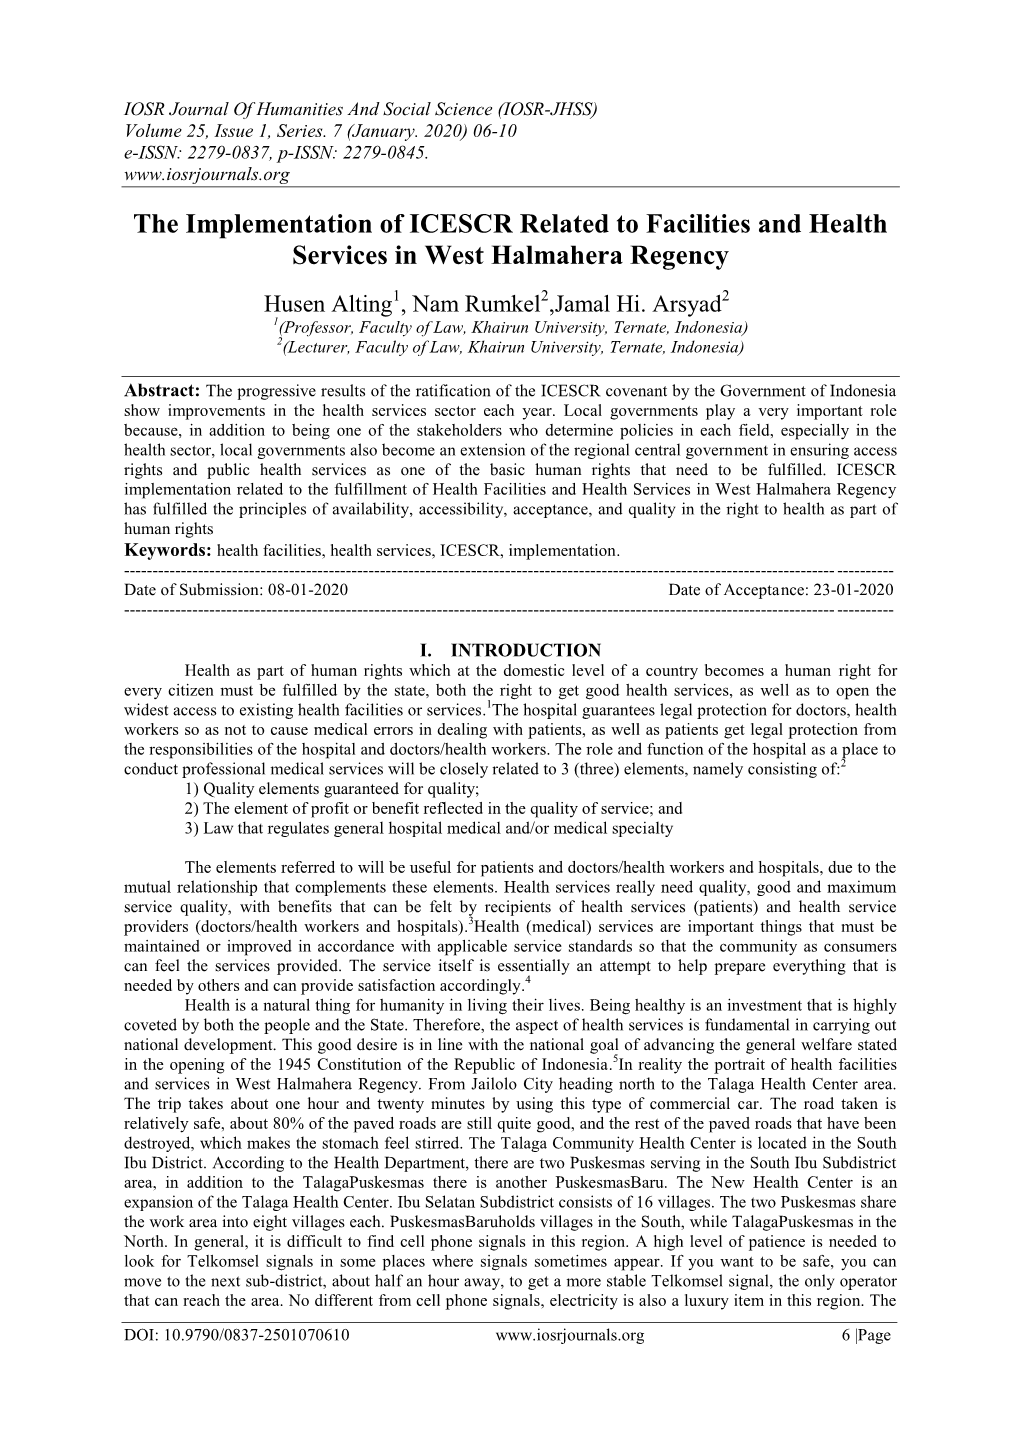 The Implementation of ICESCR Related to Facilities and Health Services in West Halmahera Regency